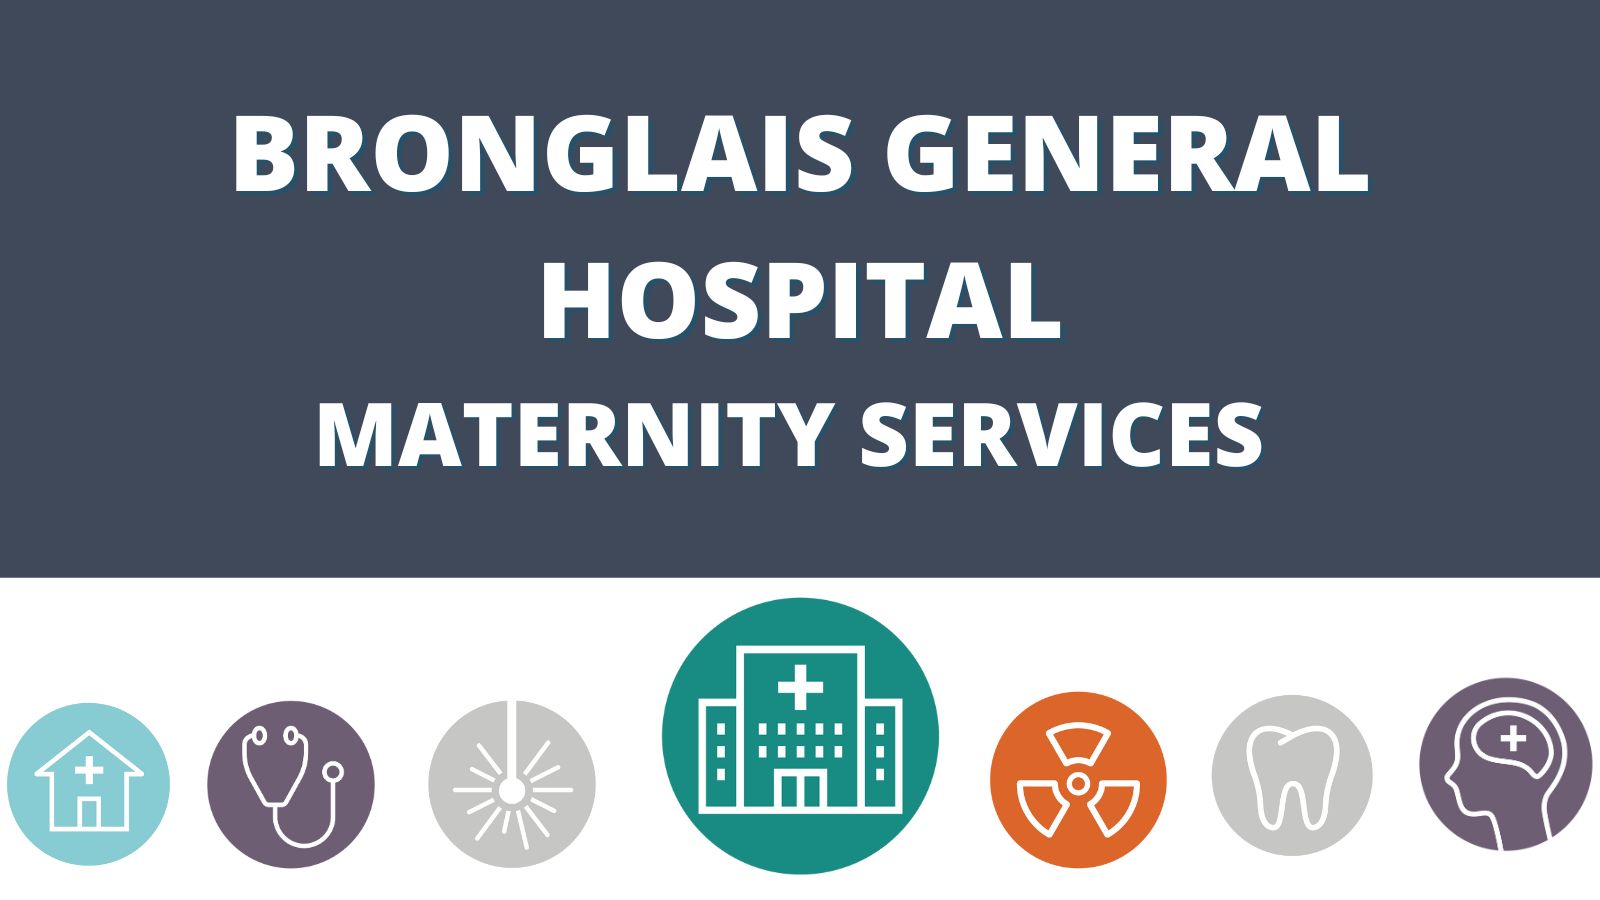 Bronglais General Hospital Maternity Services